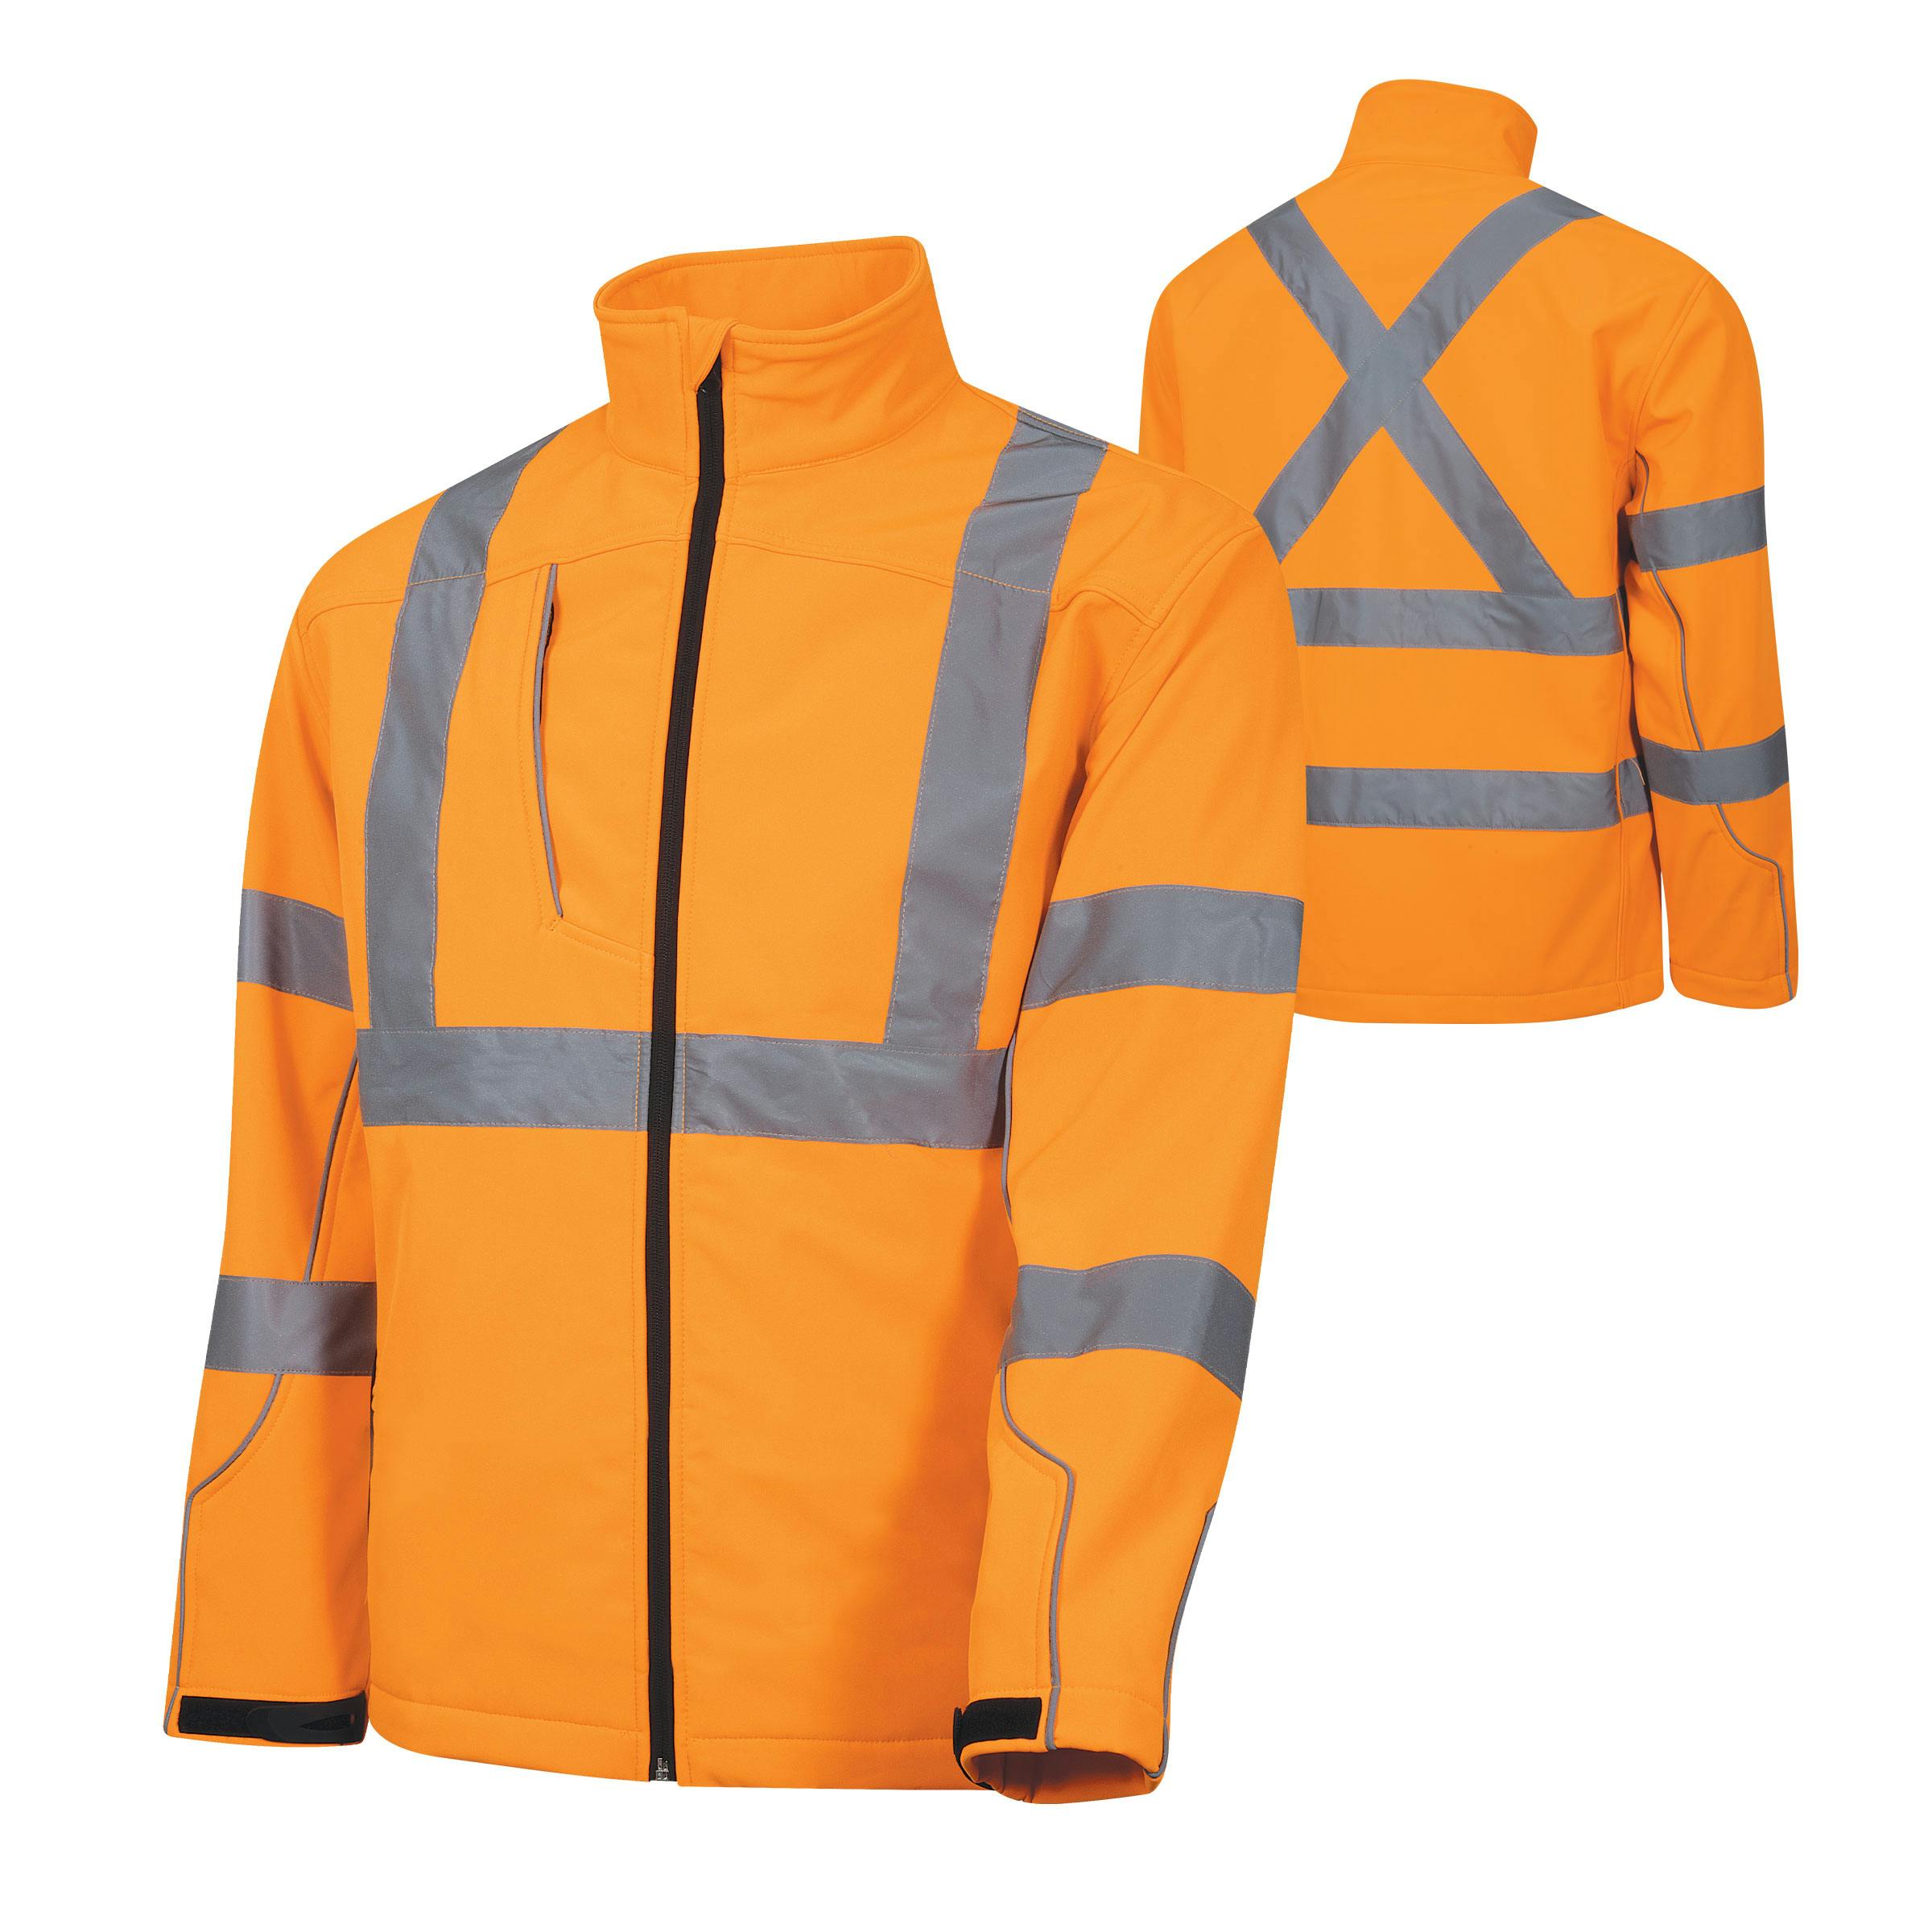 TRu Workwear Soft Shell Jacket Single Tone 94% Polyester 6% Spandex With Piping And Tru Reflective Tape To T5 Pattern